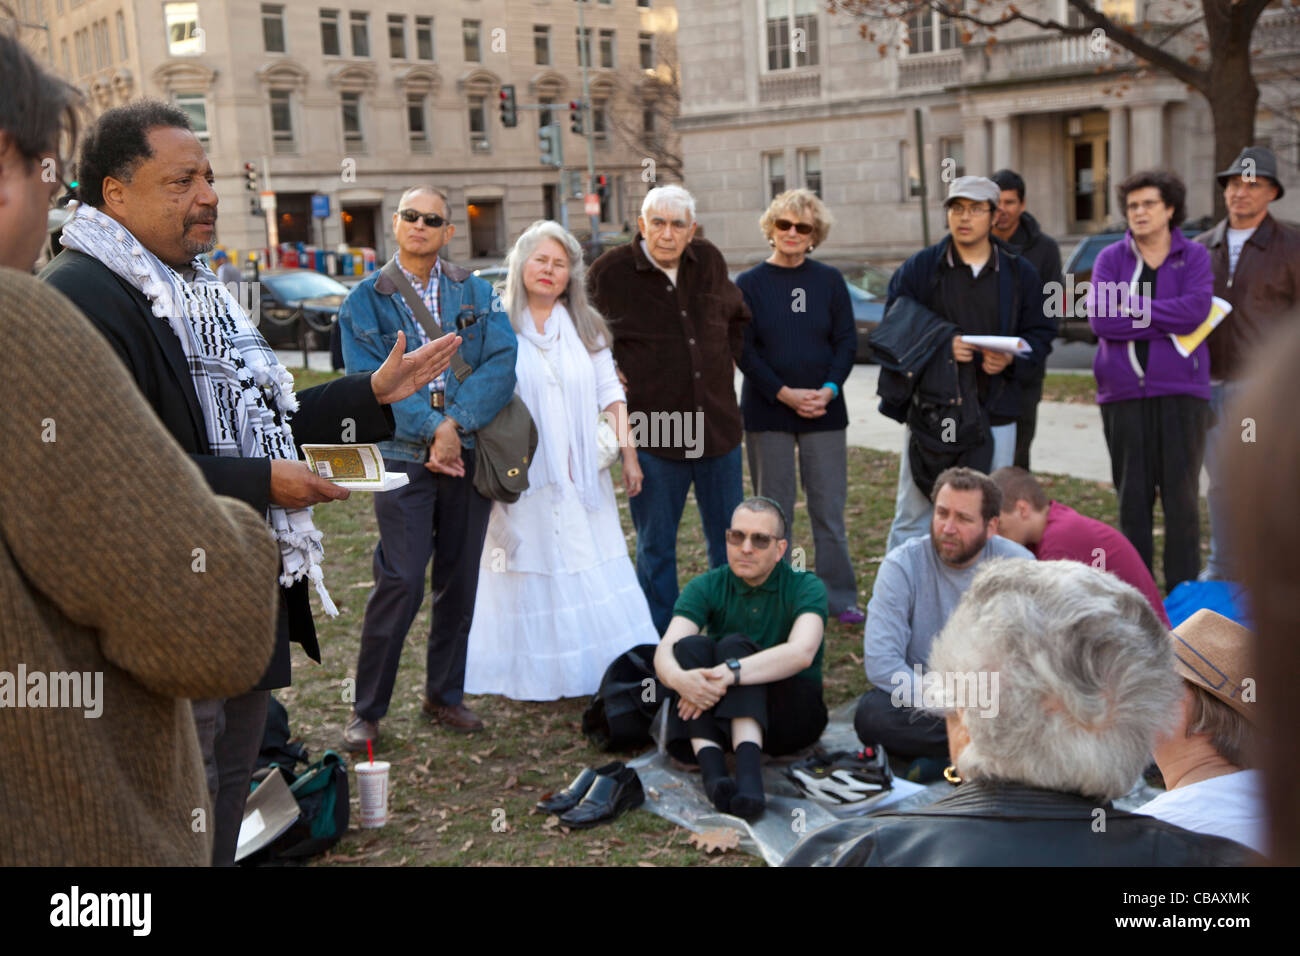 Washington, DC - Interfaith activists hold a religious service at the Occupy DC camp in McPherson Square. Stock Photo